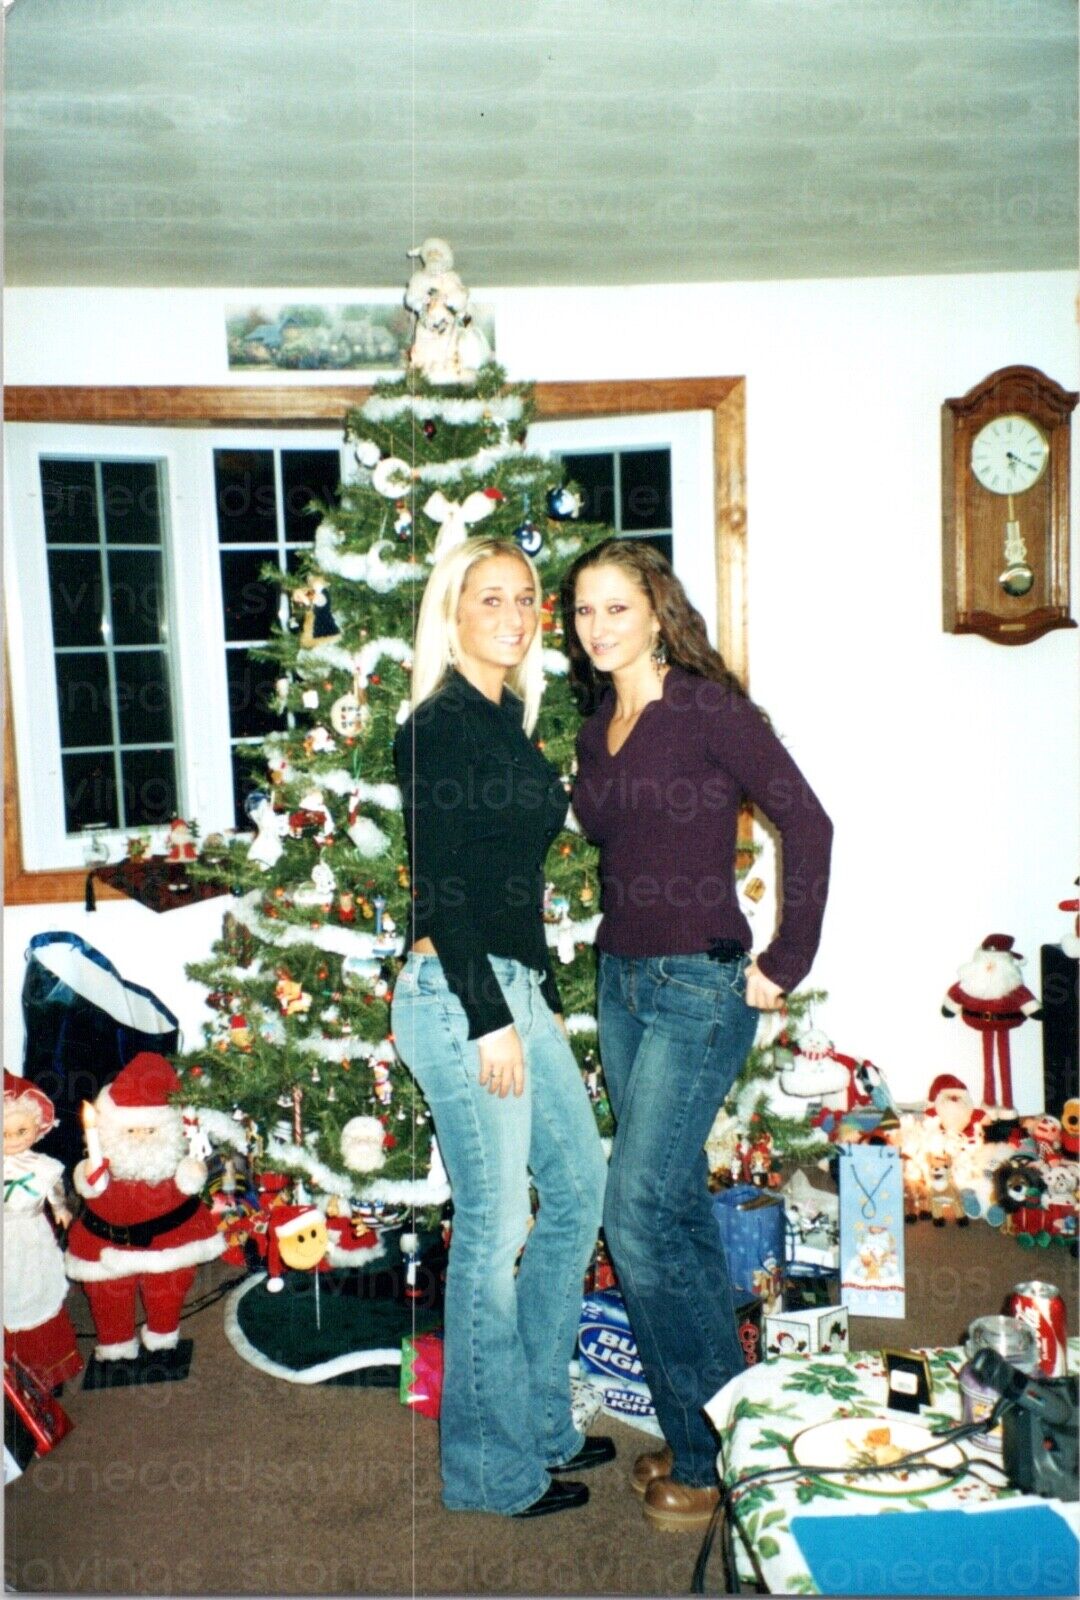 VINTAGE 2000S FOUND PHOTO - CUTE YOUNG WOMEN GIRLS POSE BY CHRISTMAS TREE PARTY